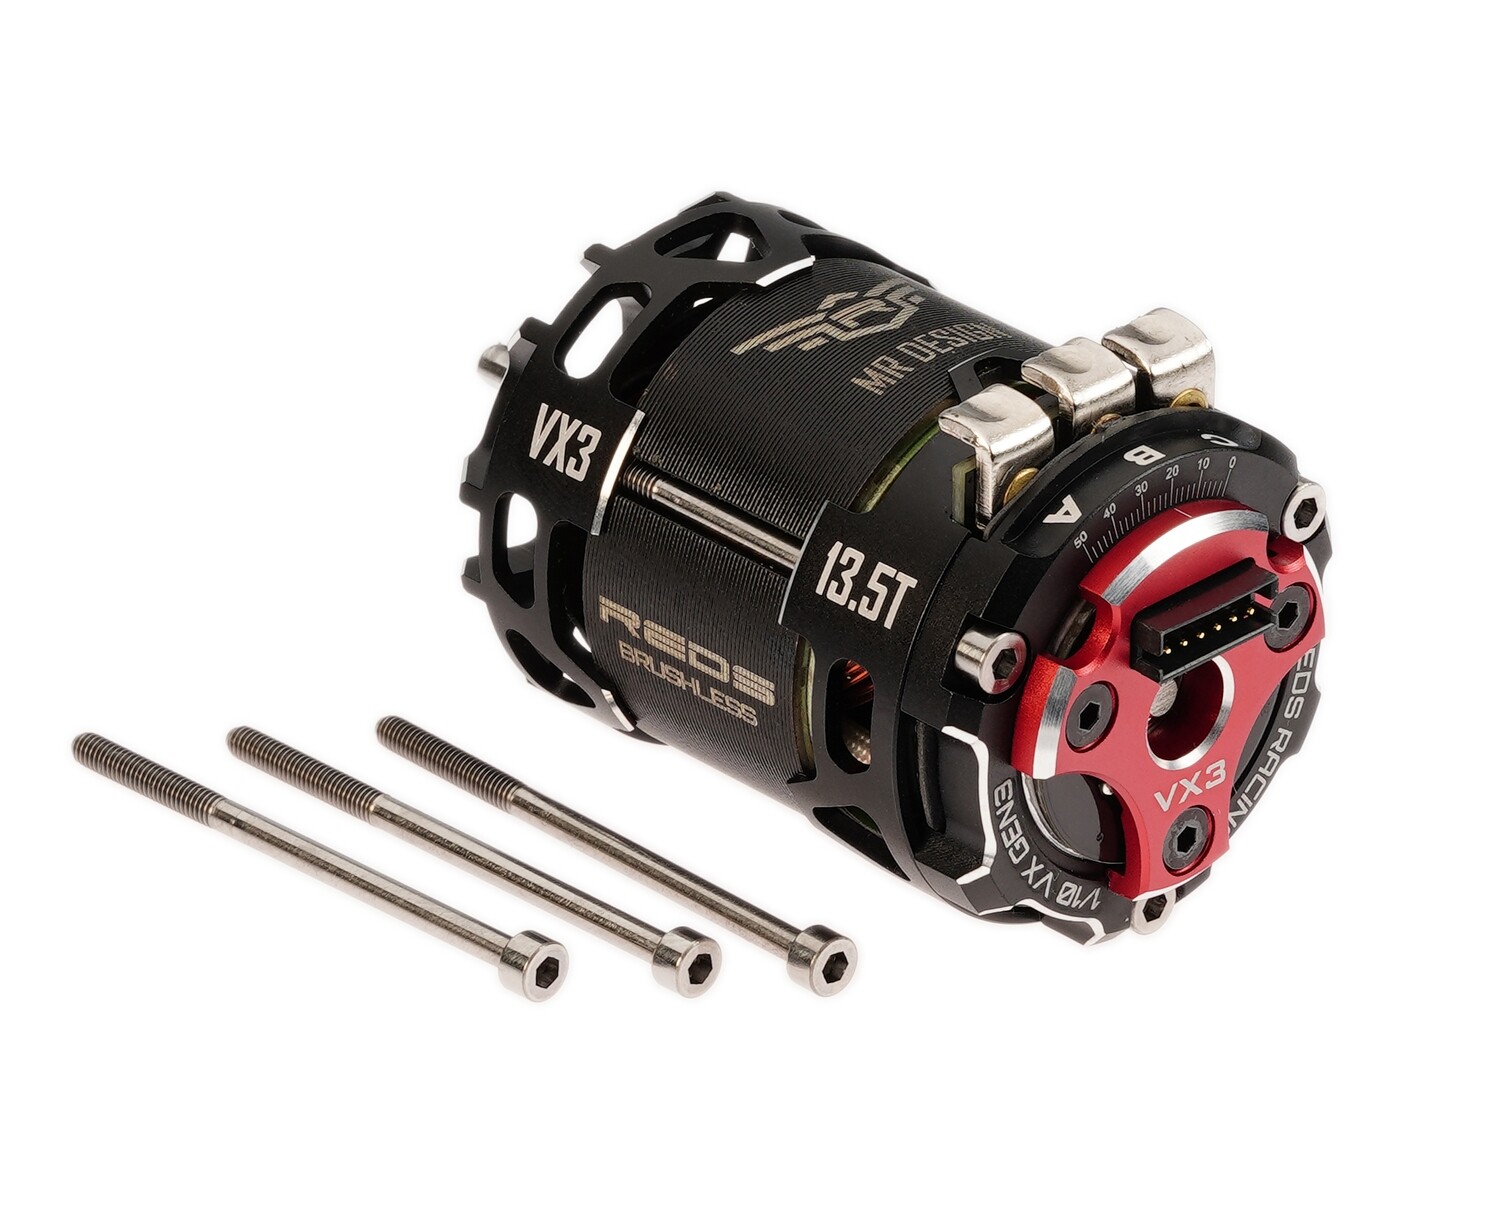 BRUSHLESS MOTOR REDS VX3 540 13.5T 2 POLE SENSORED HIGH TORQUE FACTORY SELECTED